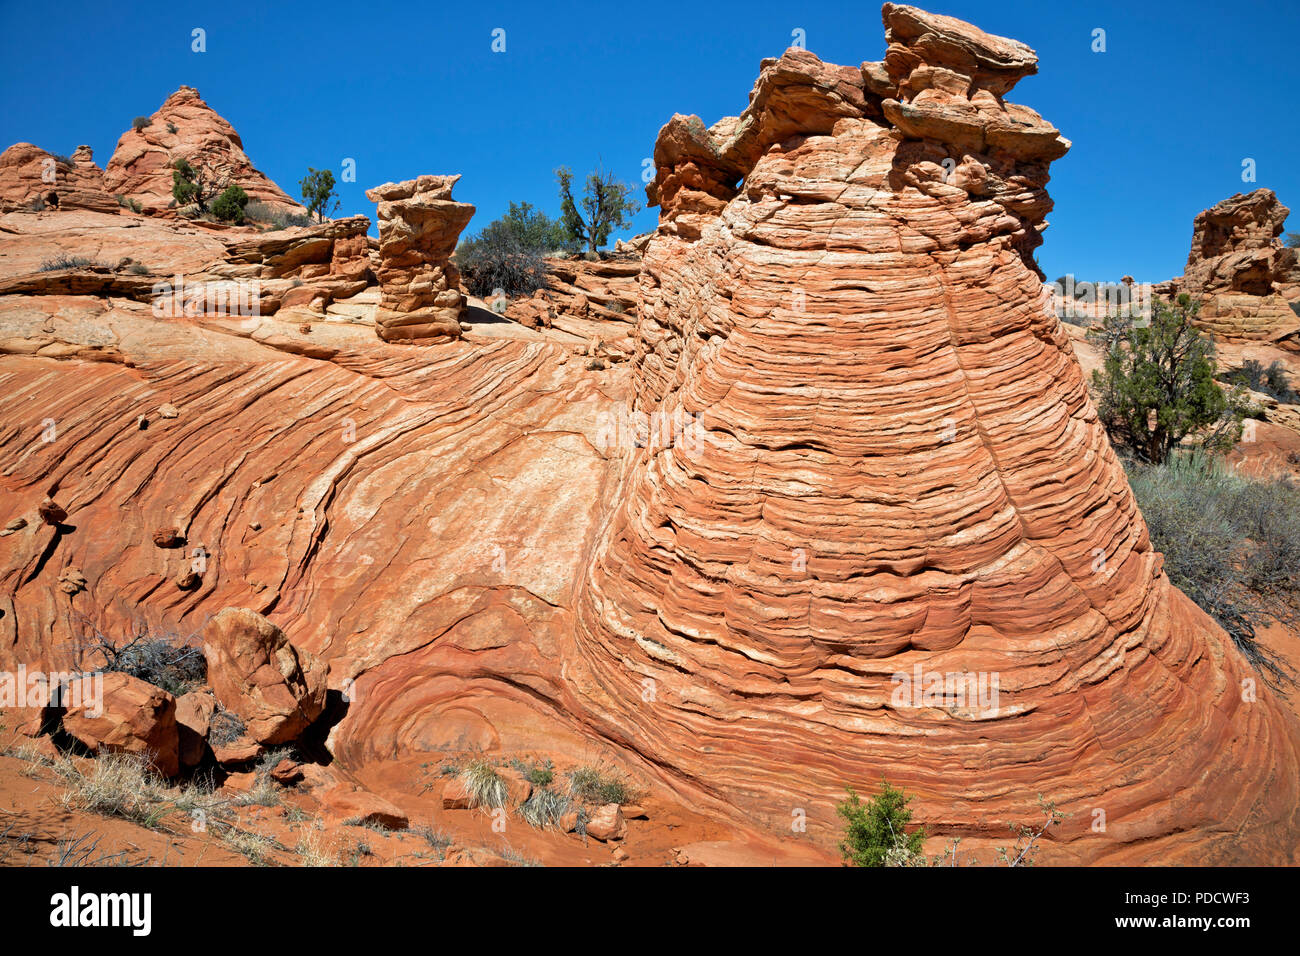 AZ00226-00...ARIZONA - Exposed layers on a sandstone hillside and old, eroded buttes with unusual shapes along the ridgecrest  in the Cottonwood Cover Stock Photo